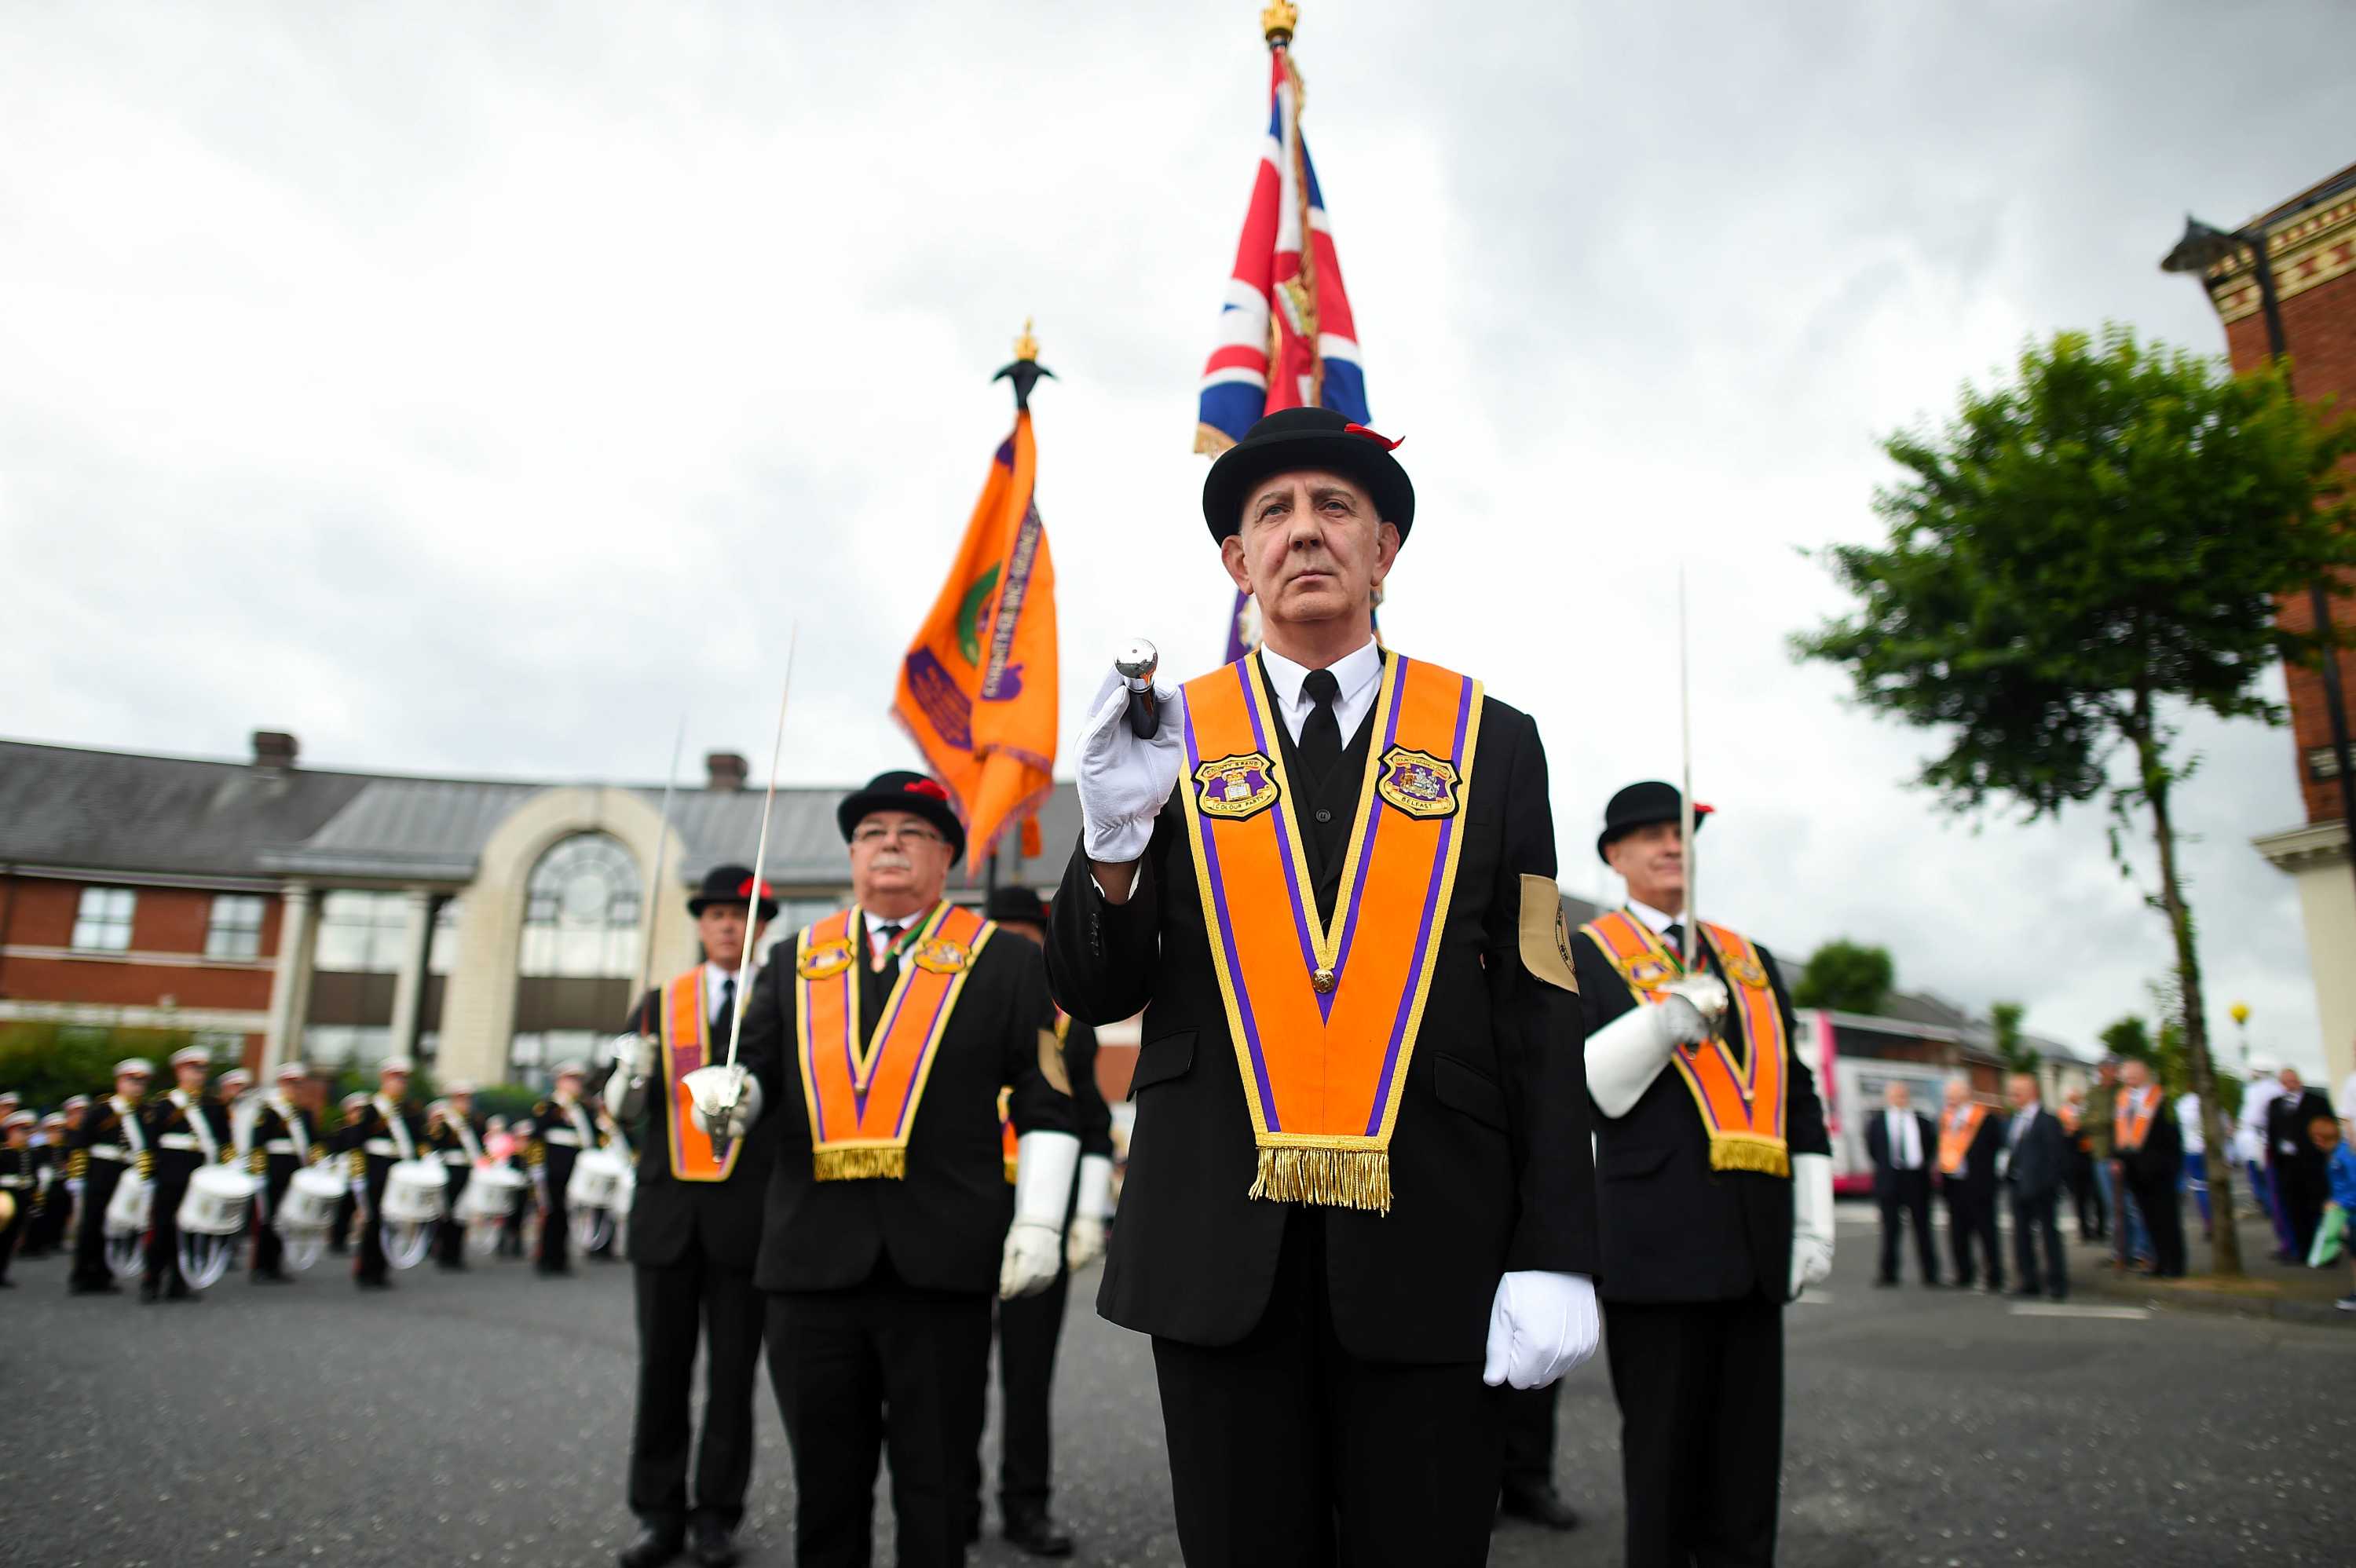 Who are the Orangemen and why do they march?